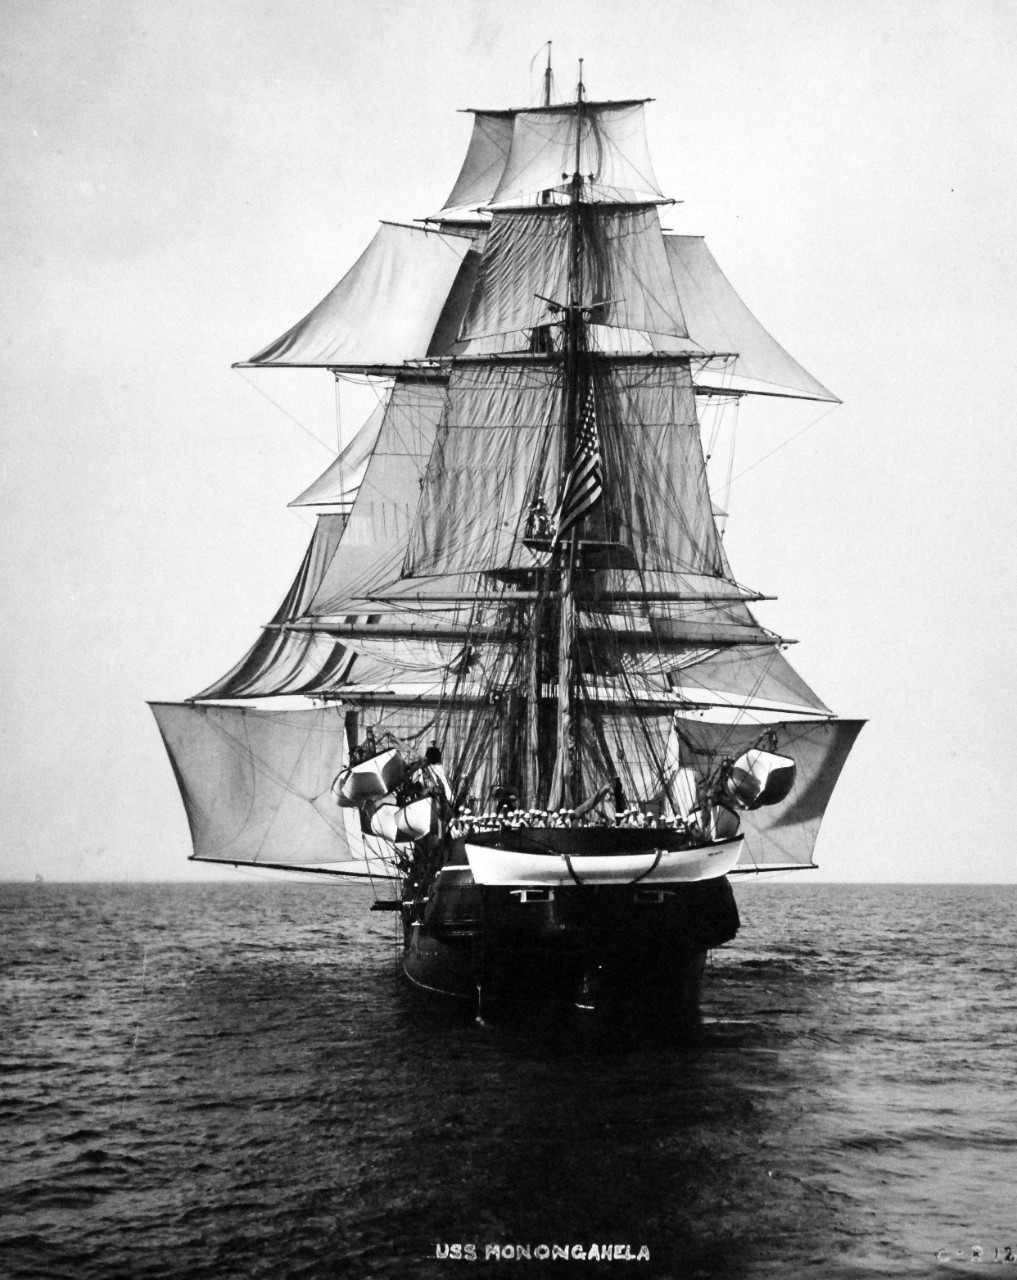 19-N-12114:   USS Monongahela, later 1890s   USS Monongahela, stern view while serving as the U.S. Naval Academy Practice Ship.   Official U.S. Navy Photograph, now in the collections of the National Archives.   (2014/7/10).